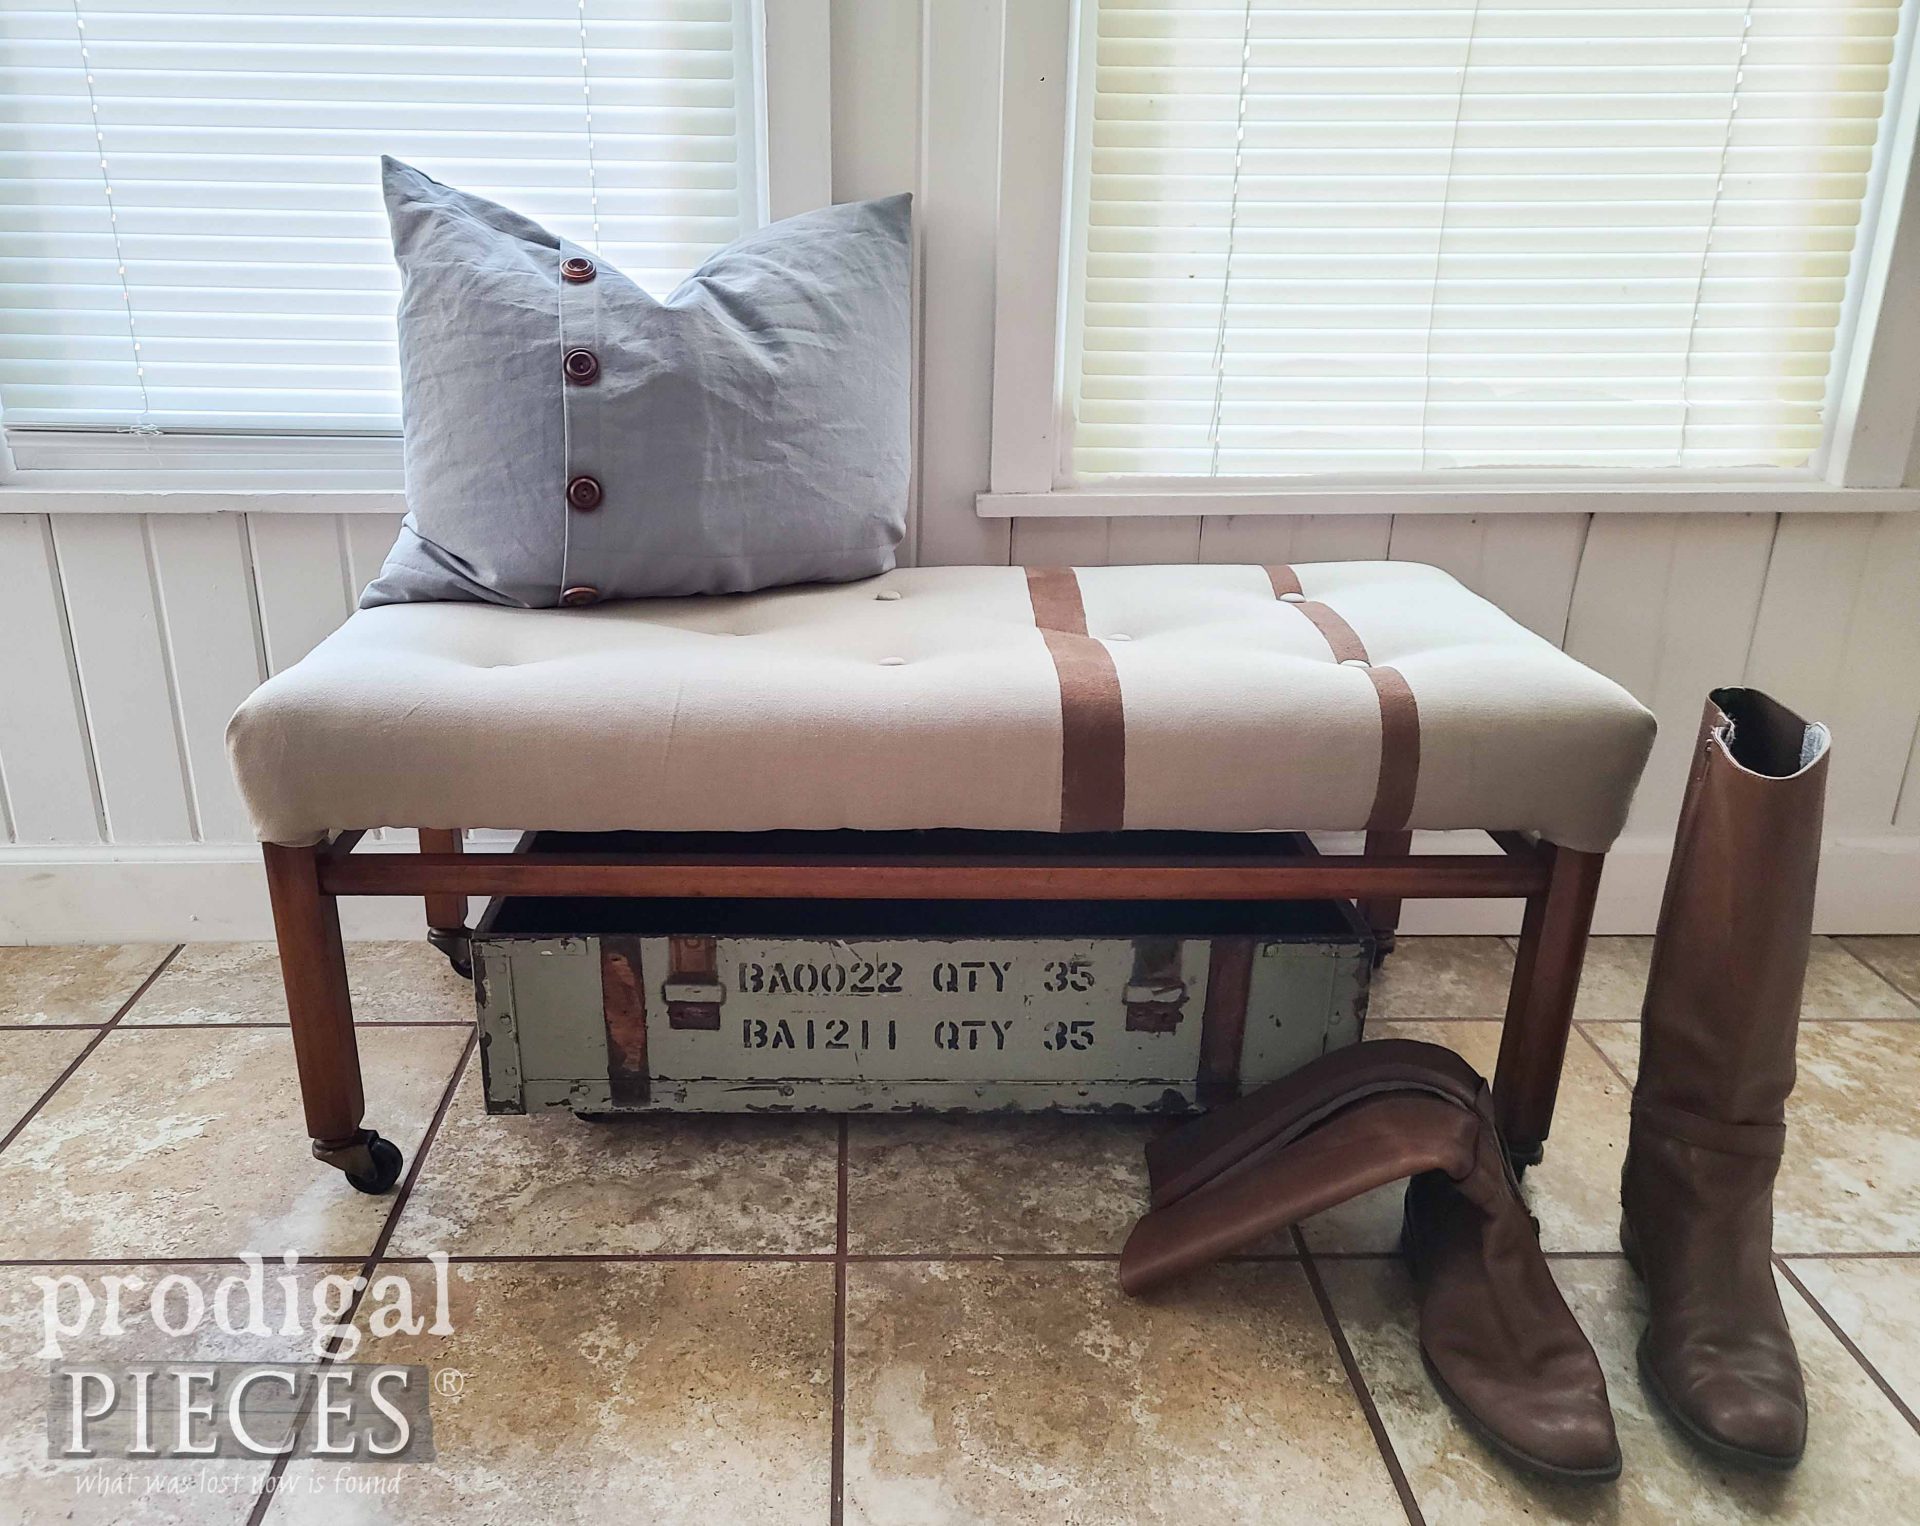 Vintage Mid Century Modern Tufted Bench Makeover with New Upholstery by Larissa of Prodigal Pieces | prodigalpieces.com #prodigalpieces #midcentury #modern #diy #upholstery